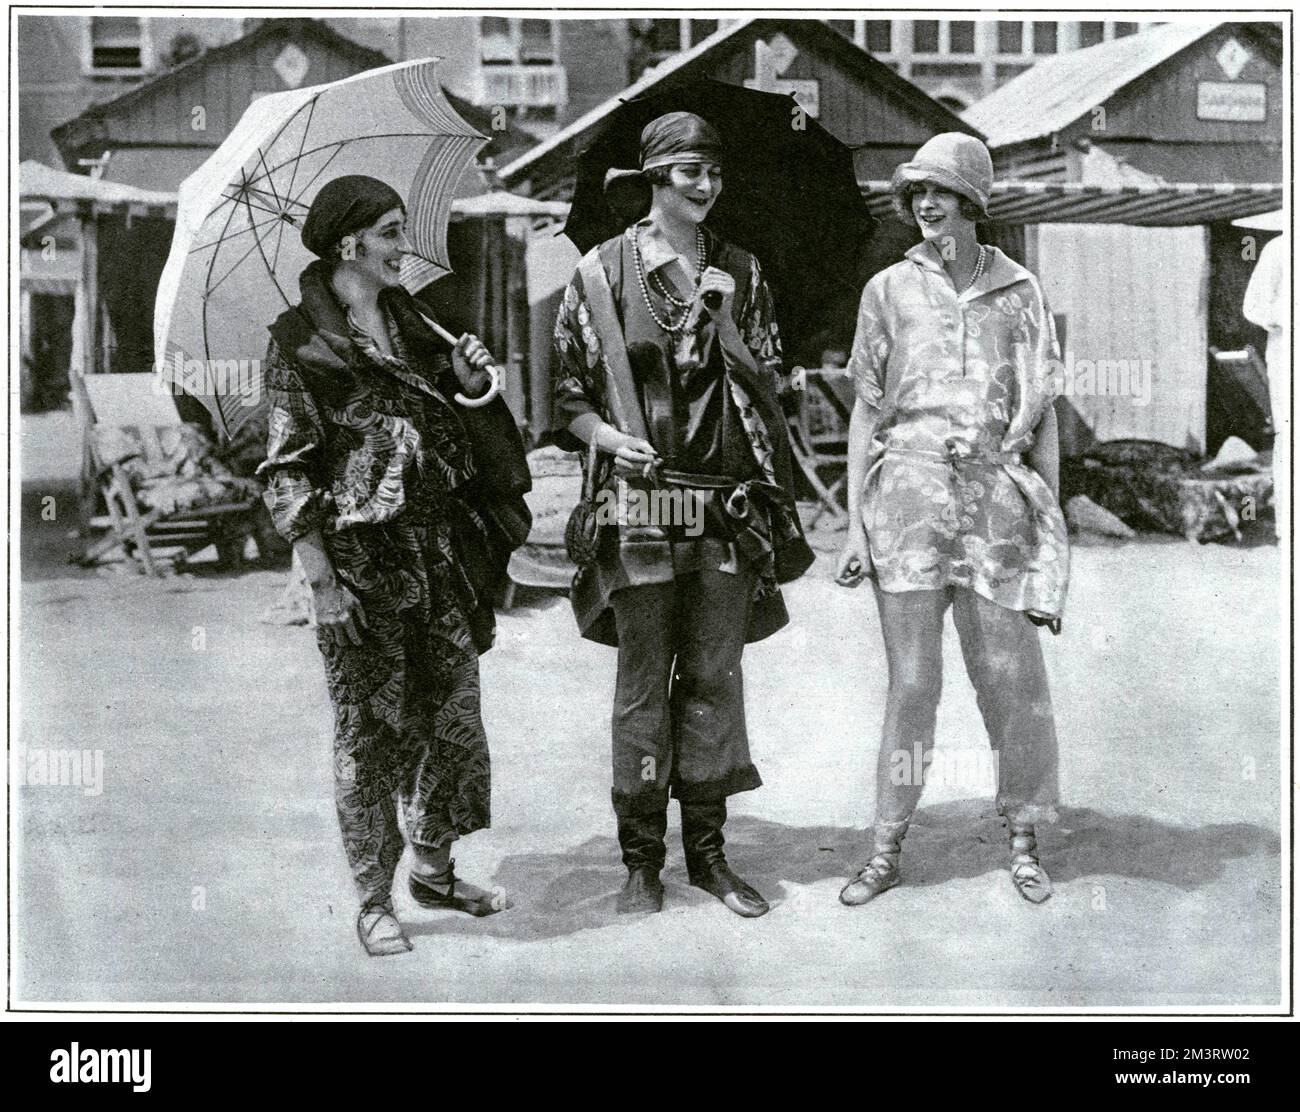 High society enjoying the pleasures of life at the Venice Lido while being dressed entirely appropriately in beach pyjamas.  From left, Countess Beatty, the Duchess of Sutherland and Lady Ednam.  It was de rigeur to wear 'beach negligees' or pyjamas, brightly patterned, coordinating ensembles in lightweight fabrics.  The Sketch magazine gives special mention to the Duchess's Russian style boots.     Date: 1924 Stock Photo